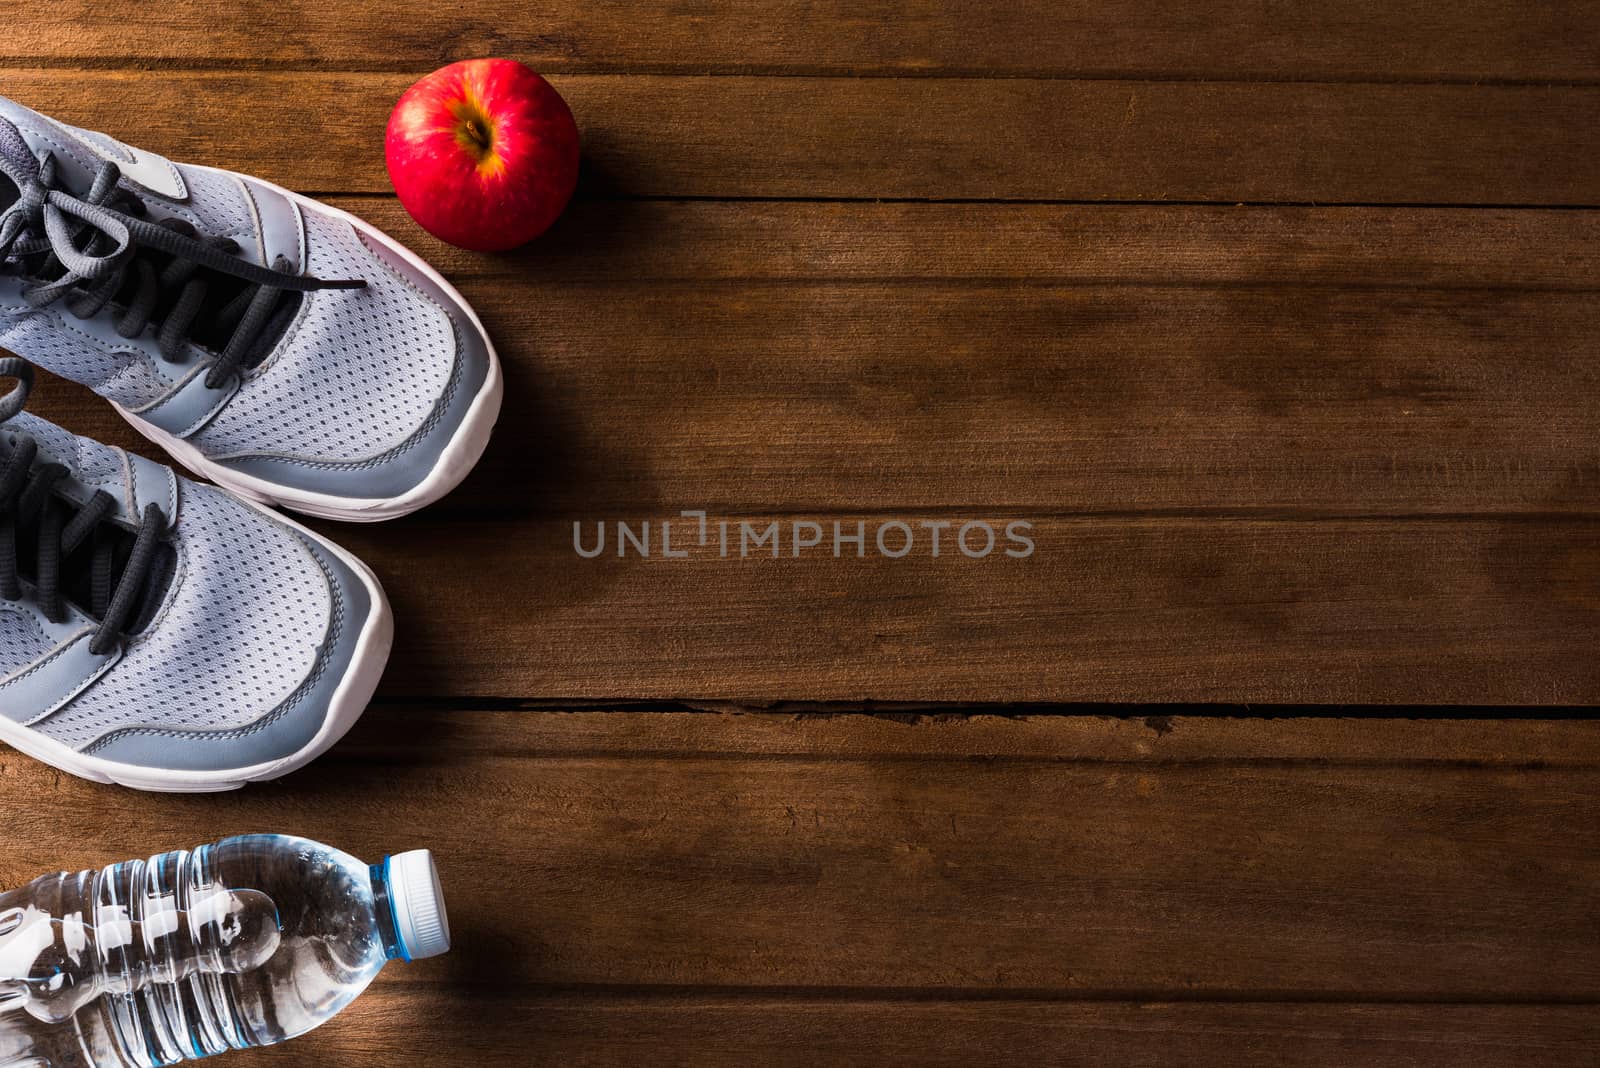 Top view of pair sports shoes, bottle water and red apple on wood table, Gray sneakers and accessories equipment in fitness GYM, Healthy workout concept